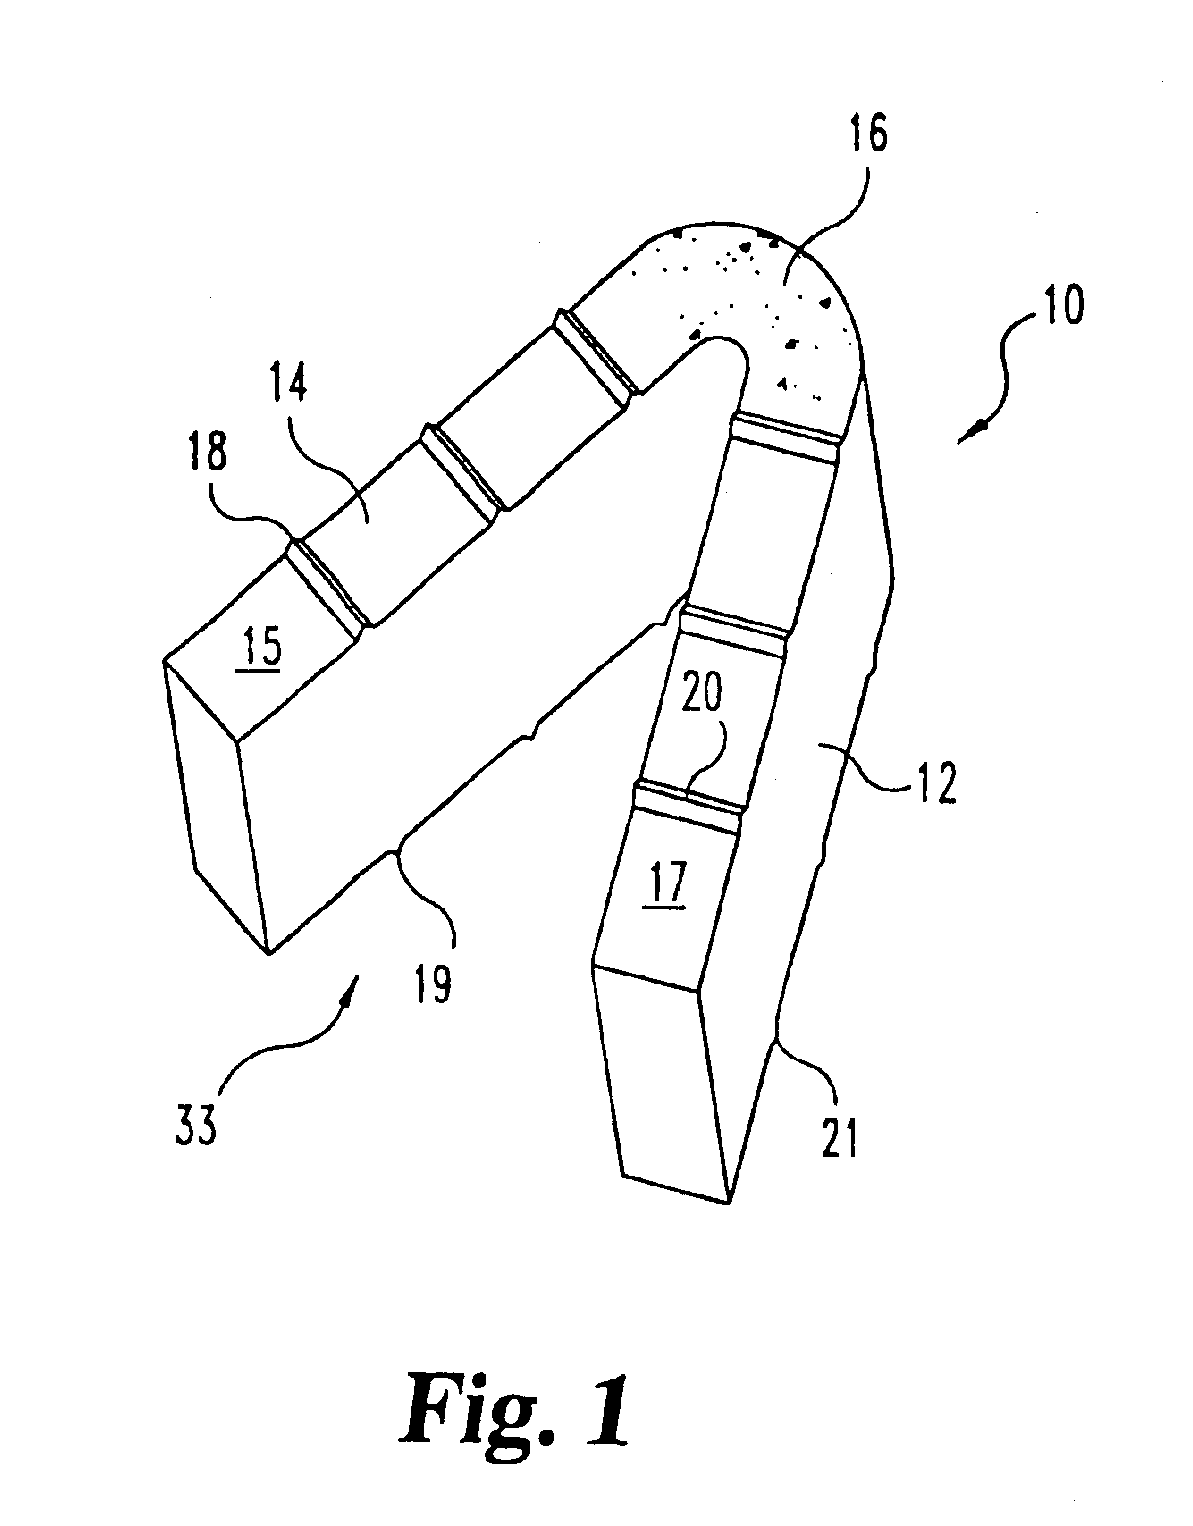 Flexible implant using partially demineralized bone